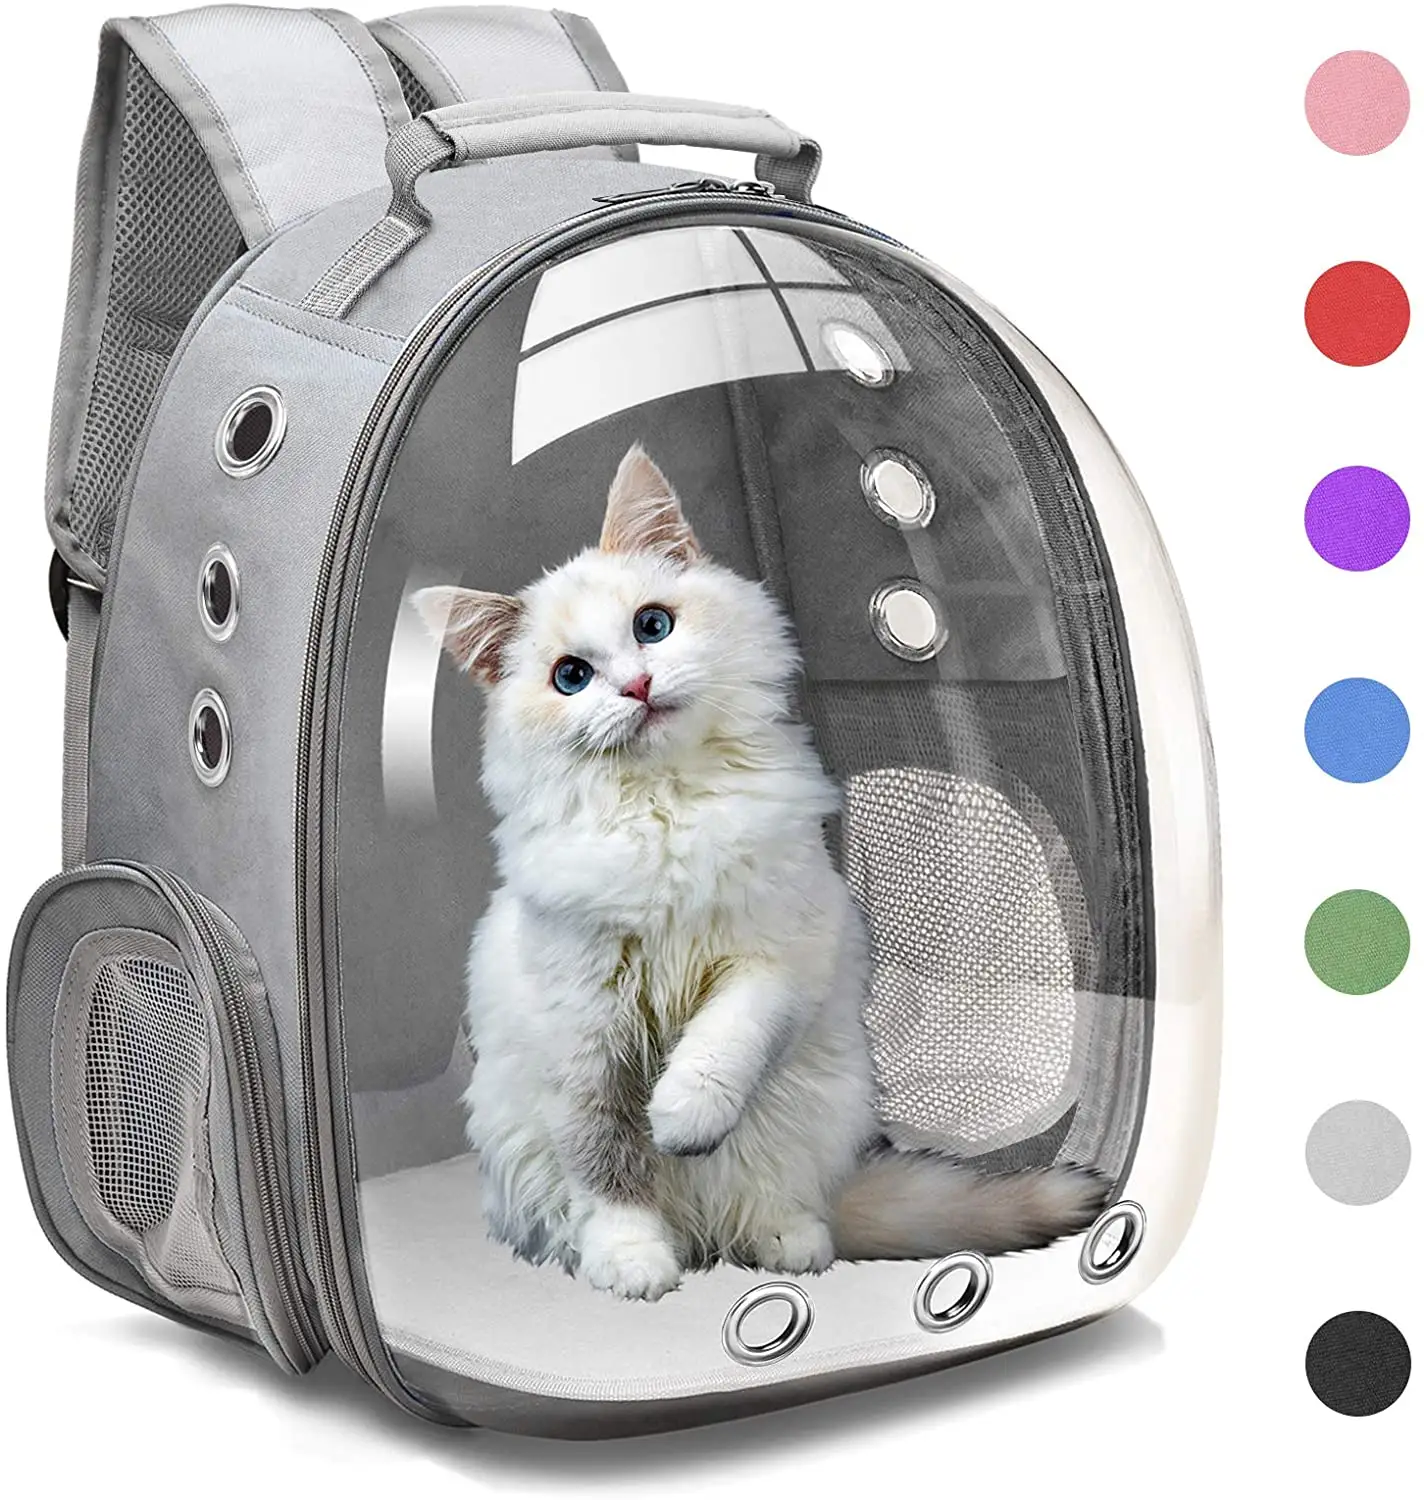 Outdoor Traveling Expandable Cat Backpack Carrier Bubble Bag Space Capsule Pet Carrier For Large Cat And Small Dogs